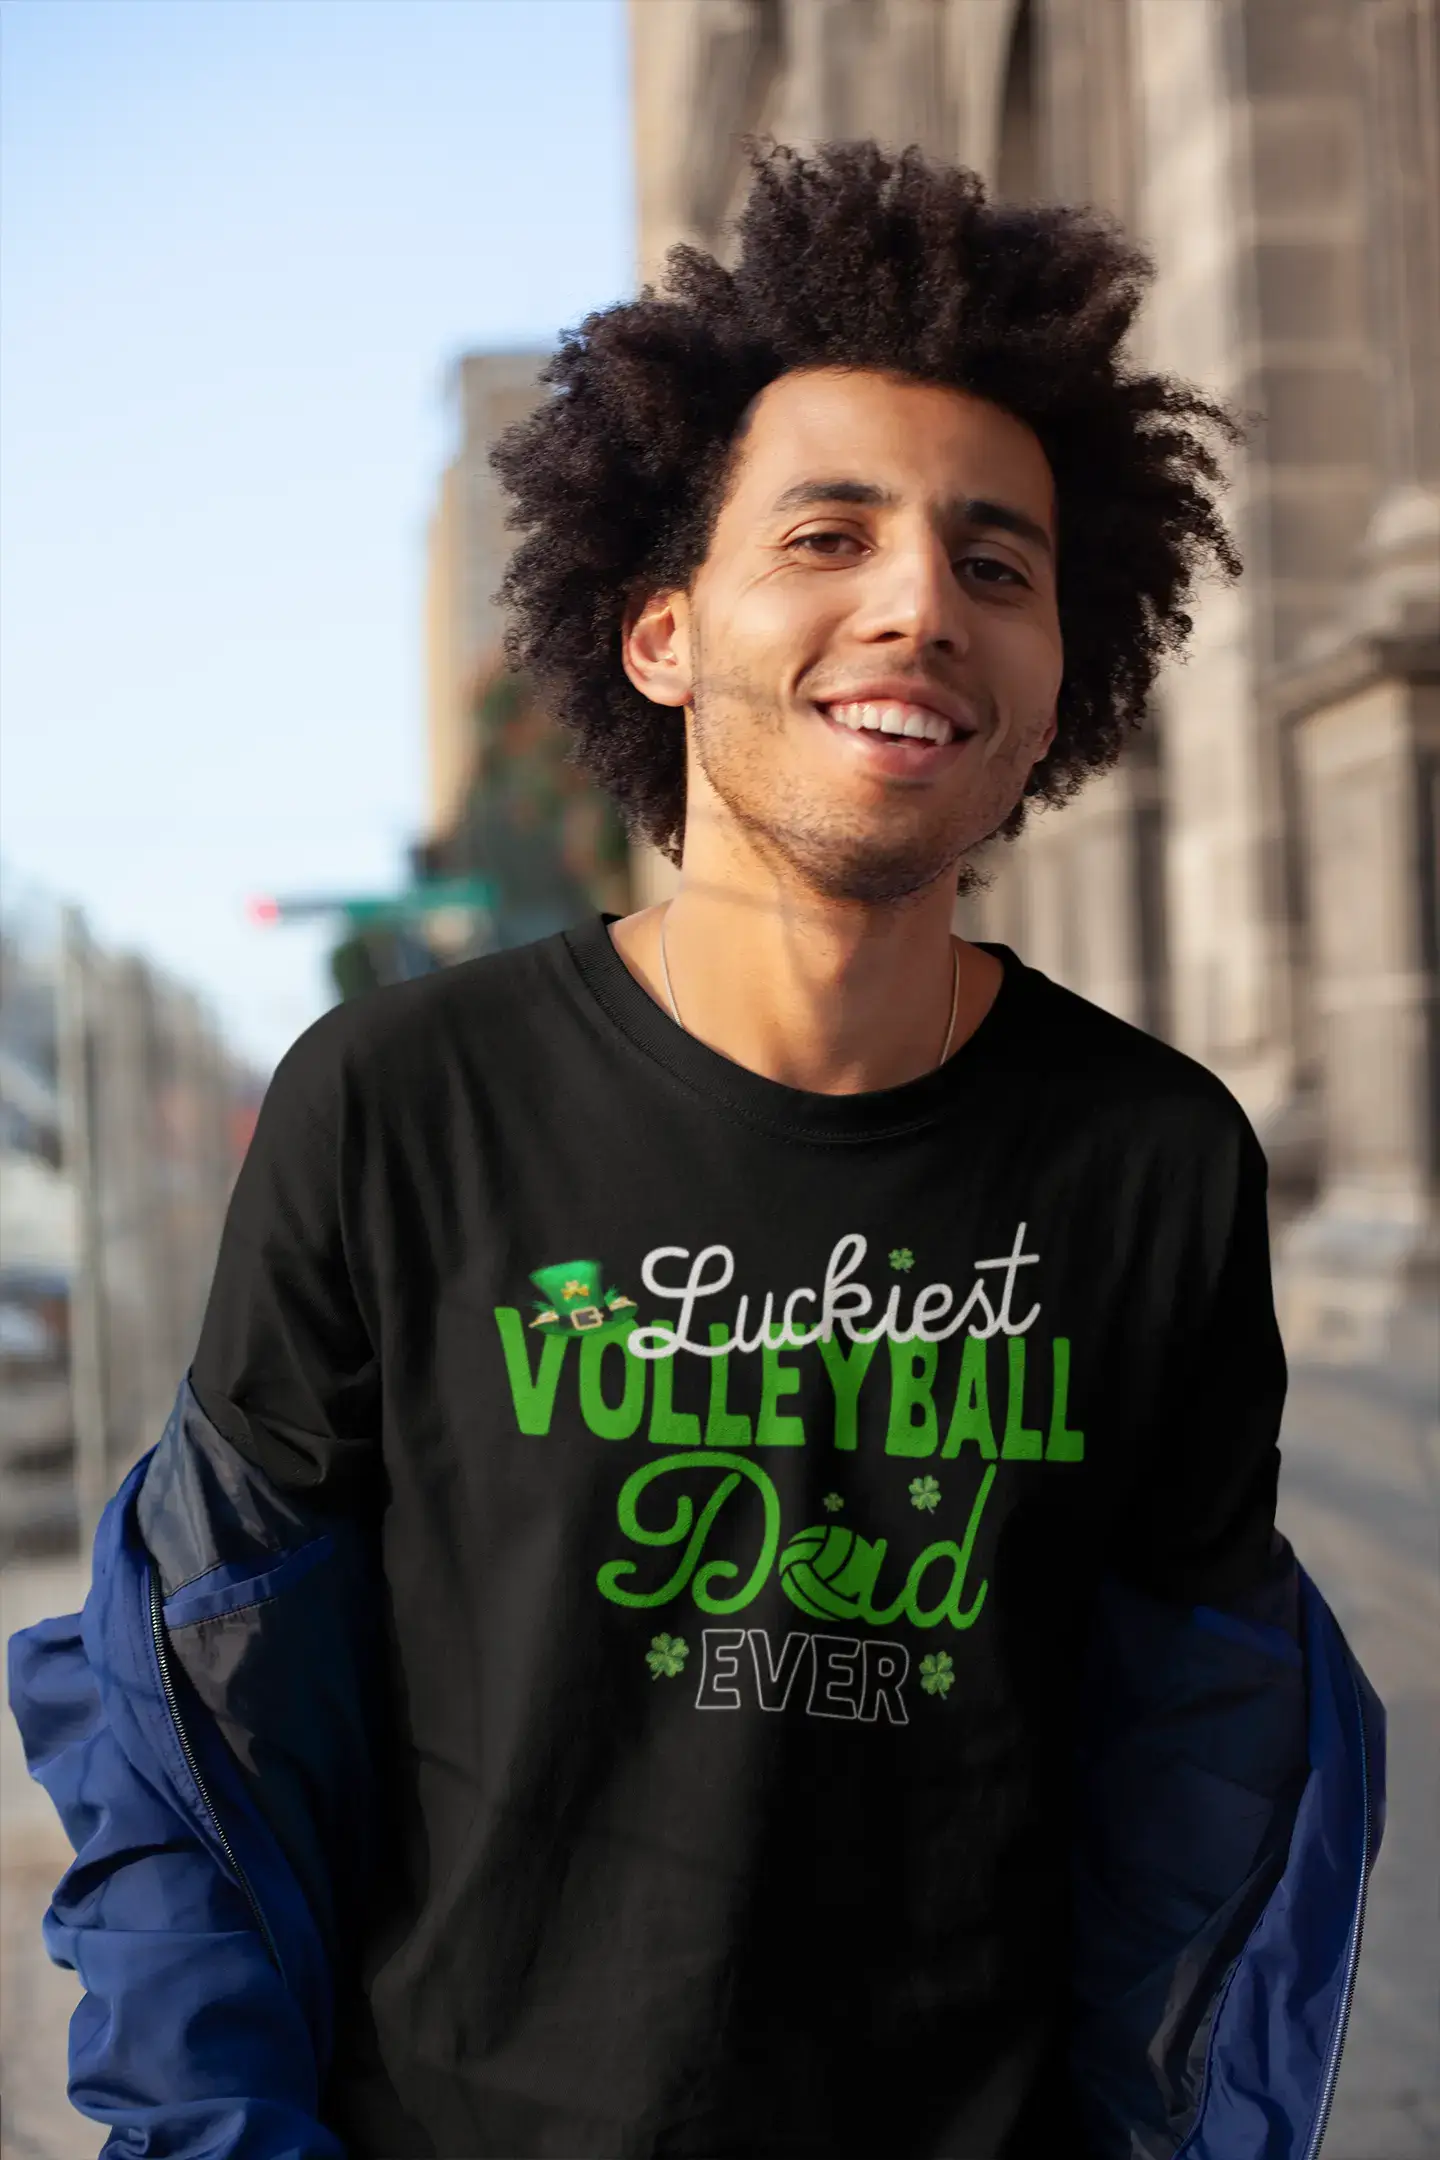 ULTRABASIC Men's Graphic T-Shirt Luckiest Volleyball Dad Ever - Gift For Father's Day